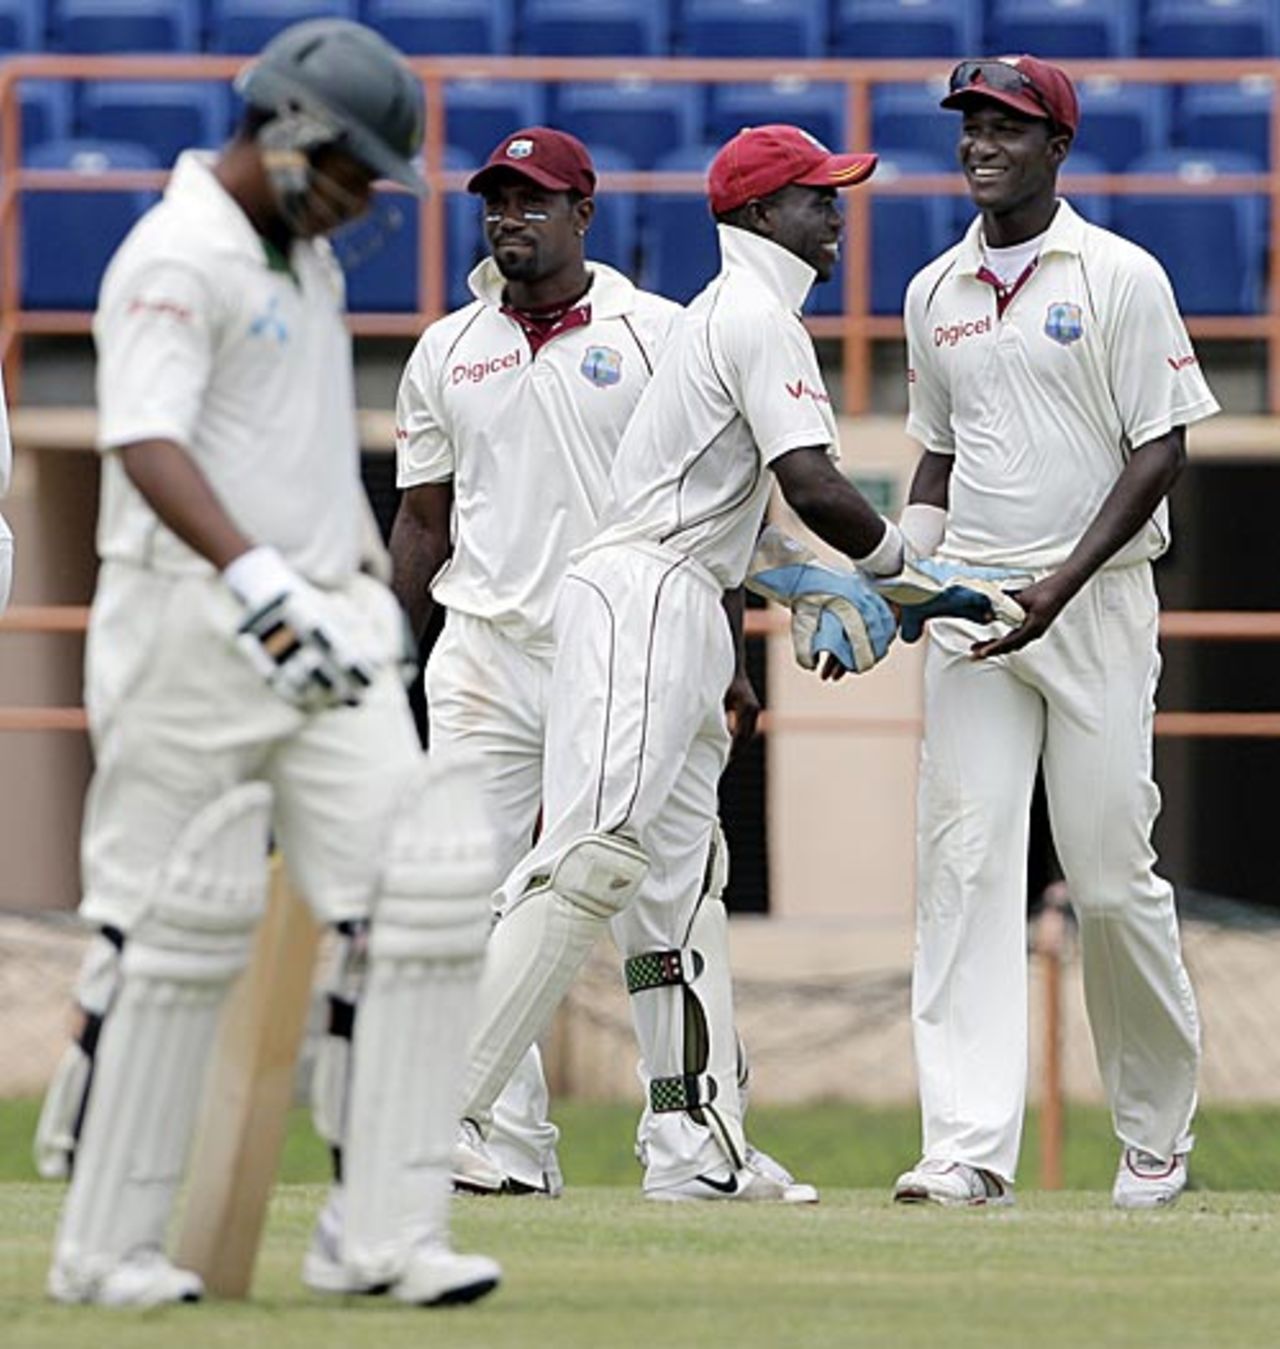 Chadwick Walton and Darren Sammy are all smiles after getting rid of Mohammad Ashraful, West Indies v Bangladesh, 2nd Test, Grenada, 2nd day, July 18, 2009